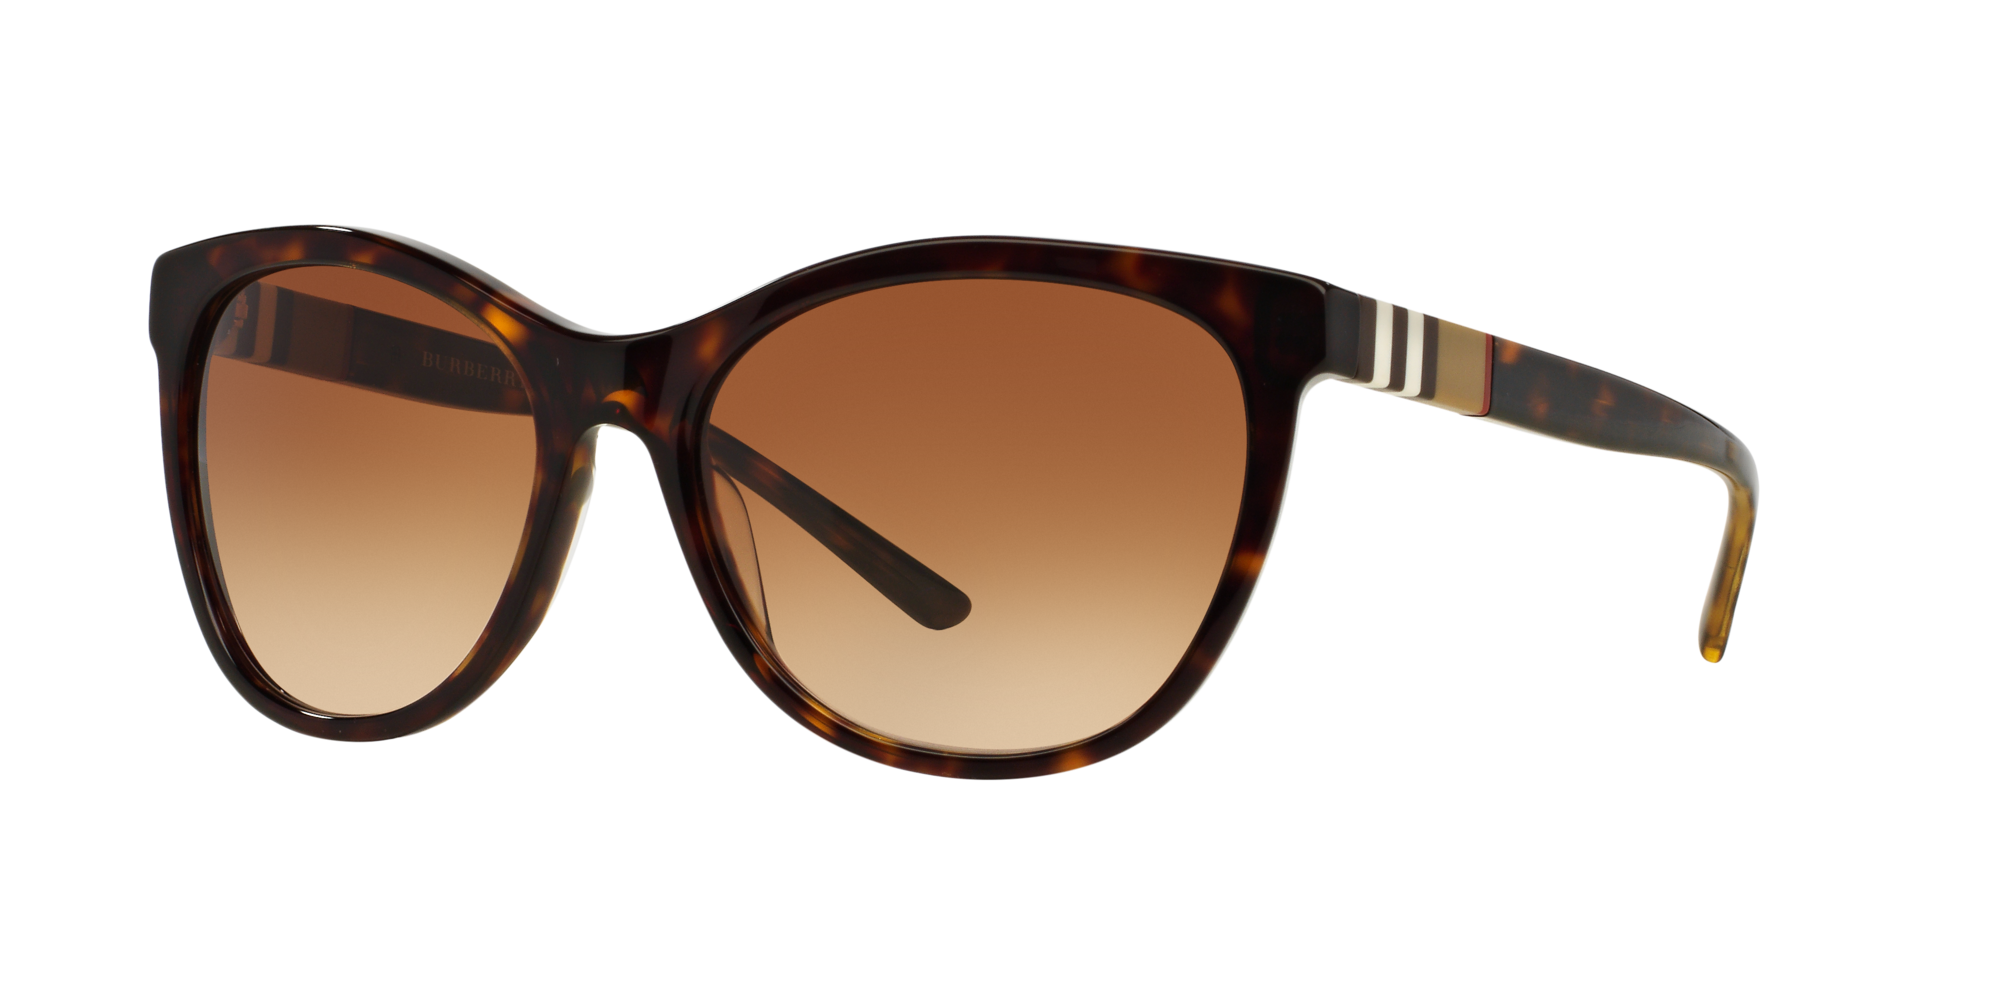 burberry shades for ladies